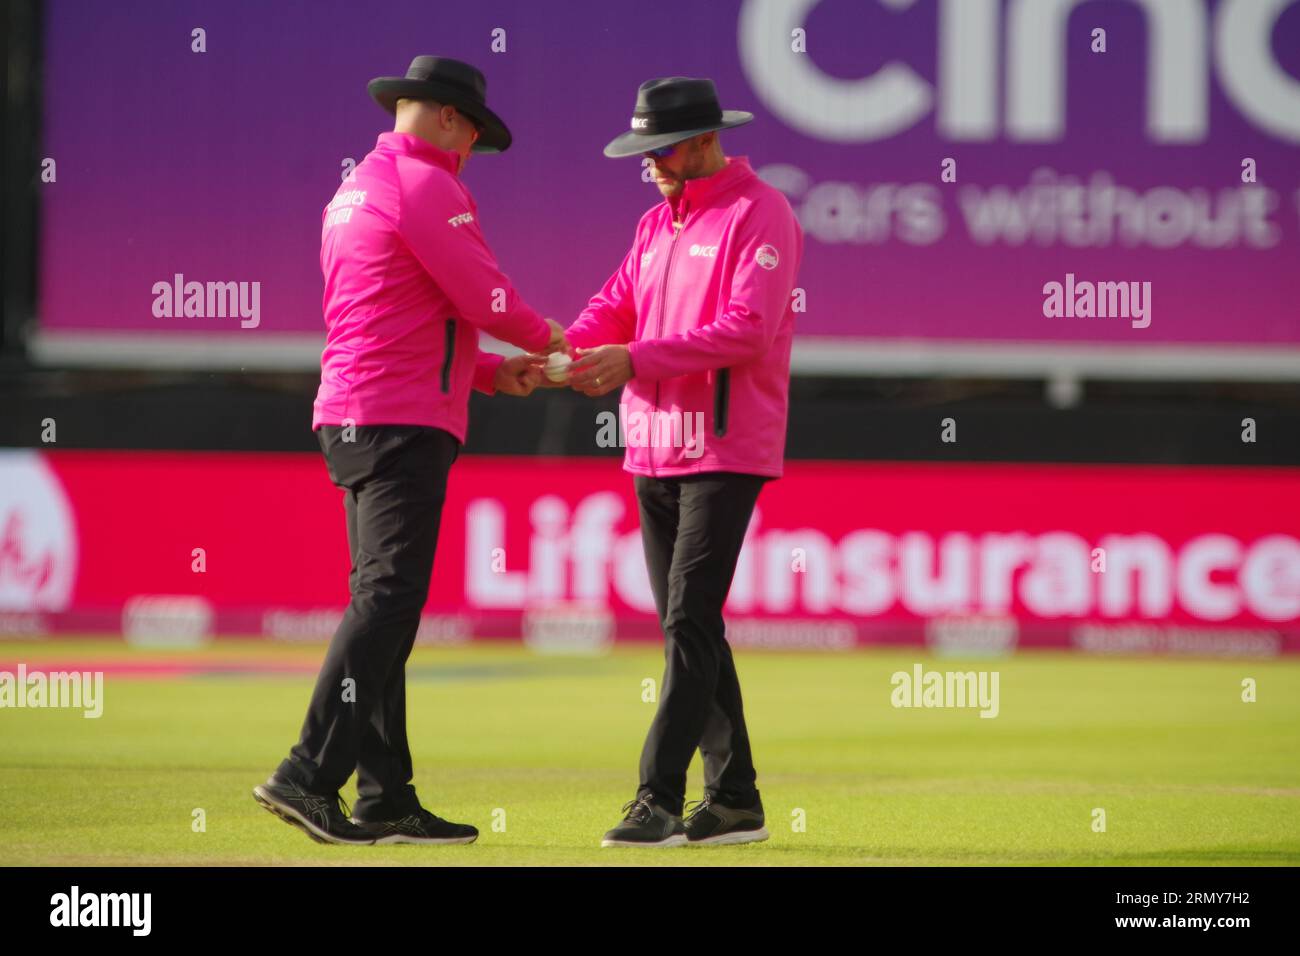 Chester le Street, 30 August 2023. Umpires Martin Saggersand Mike Burns inspect the ball during a First Vitality T20 International match between England and New Zealand in the  at Seat Unique Riverside.  Credit: Colin Edwards/Alamy Live News Stock Photo